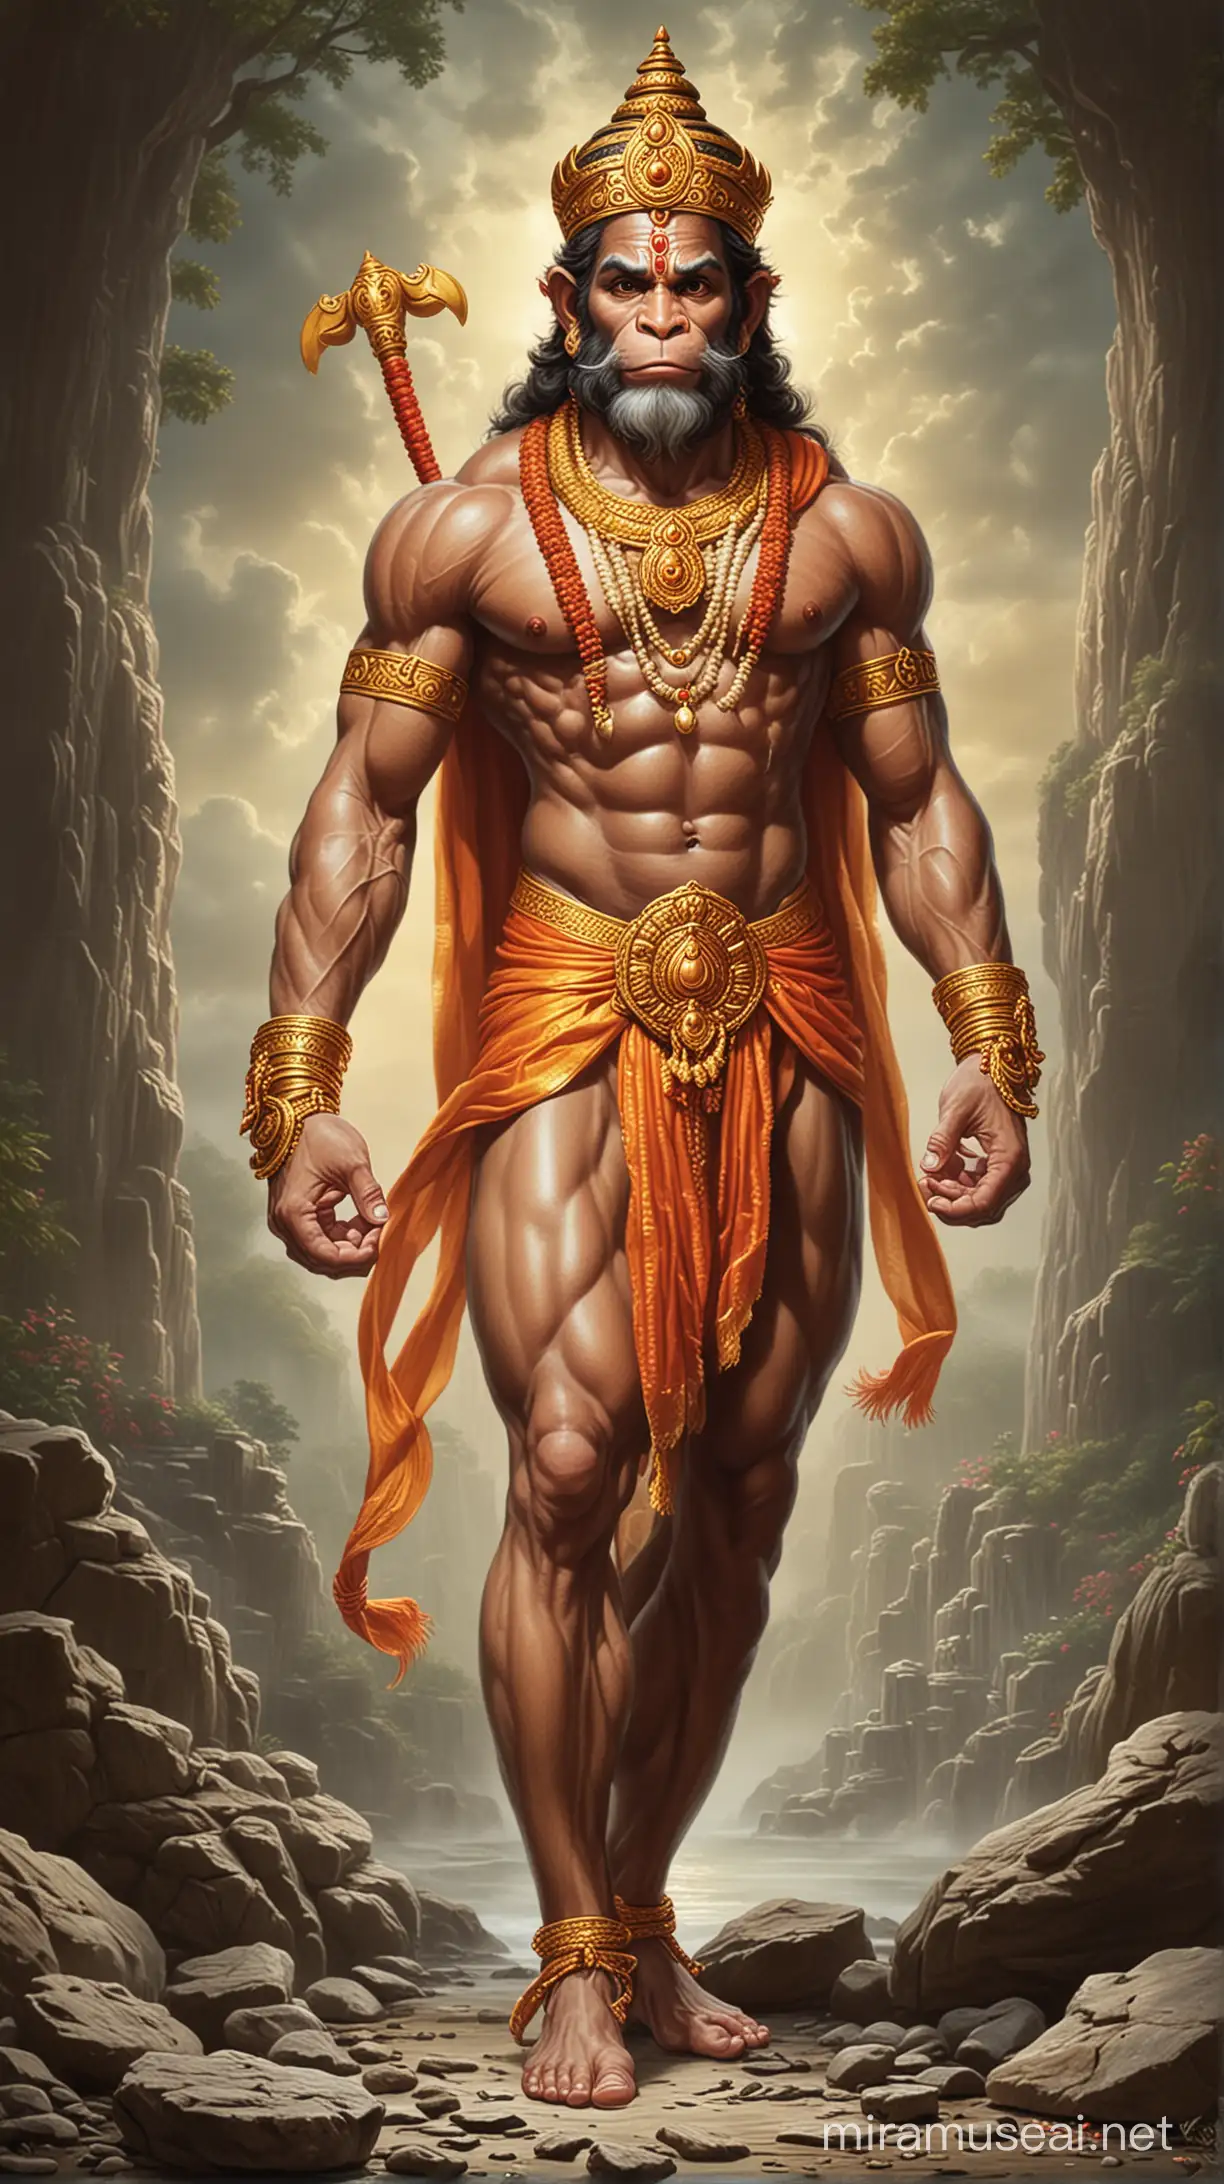 Majestic Lord Hanuman Statue Amidst Forest Serenity